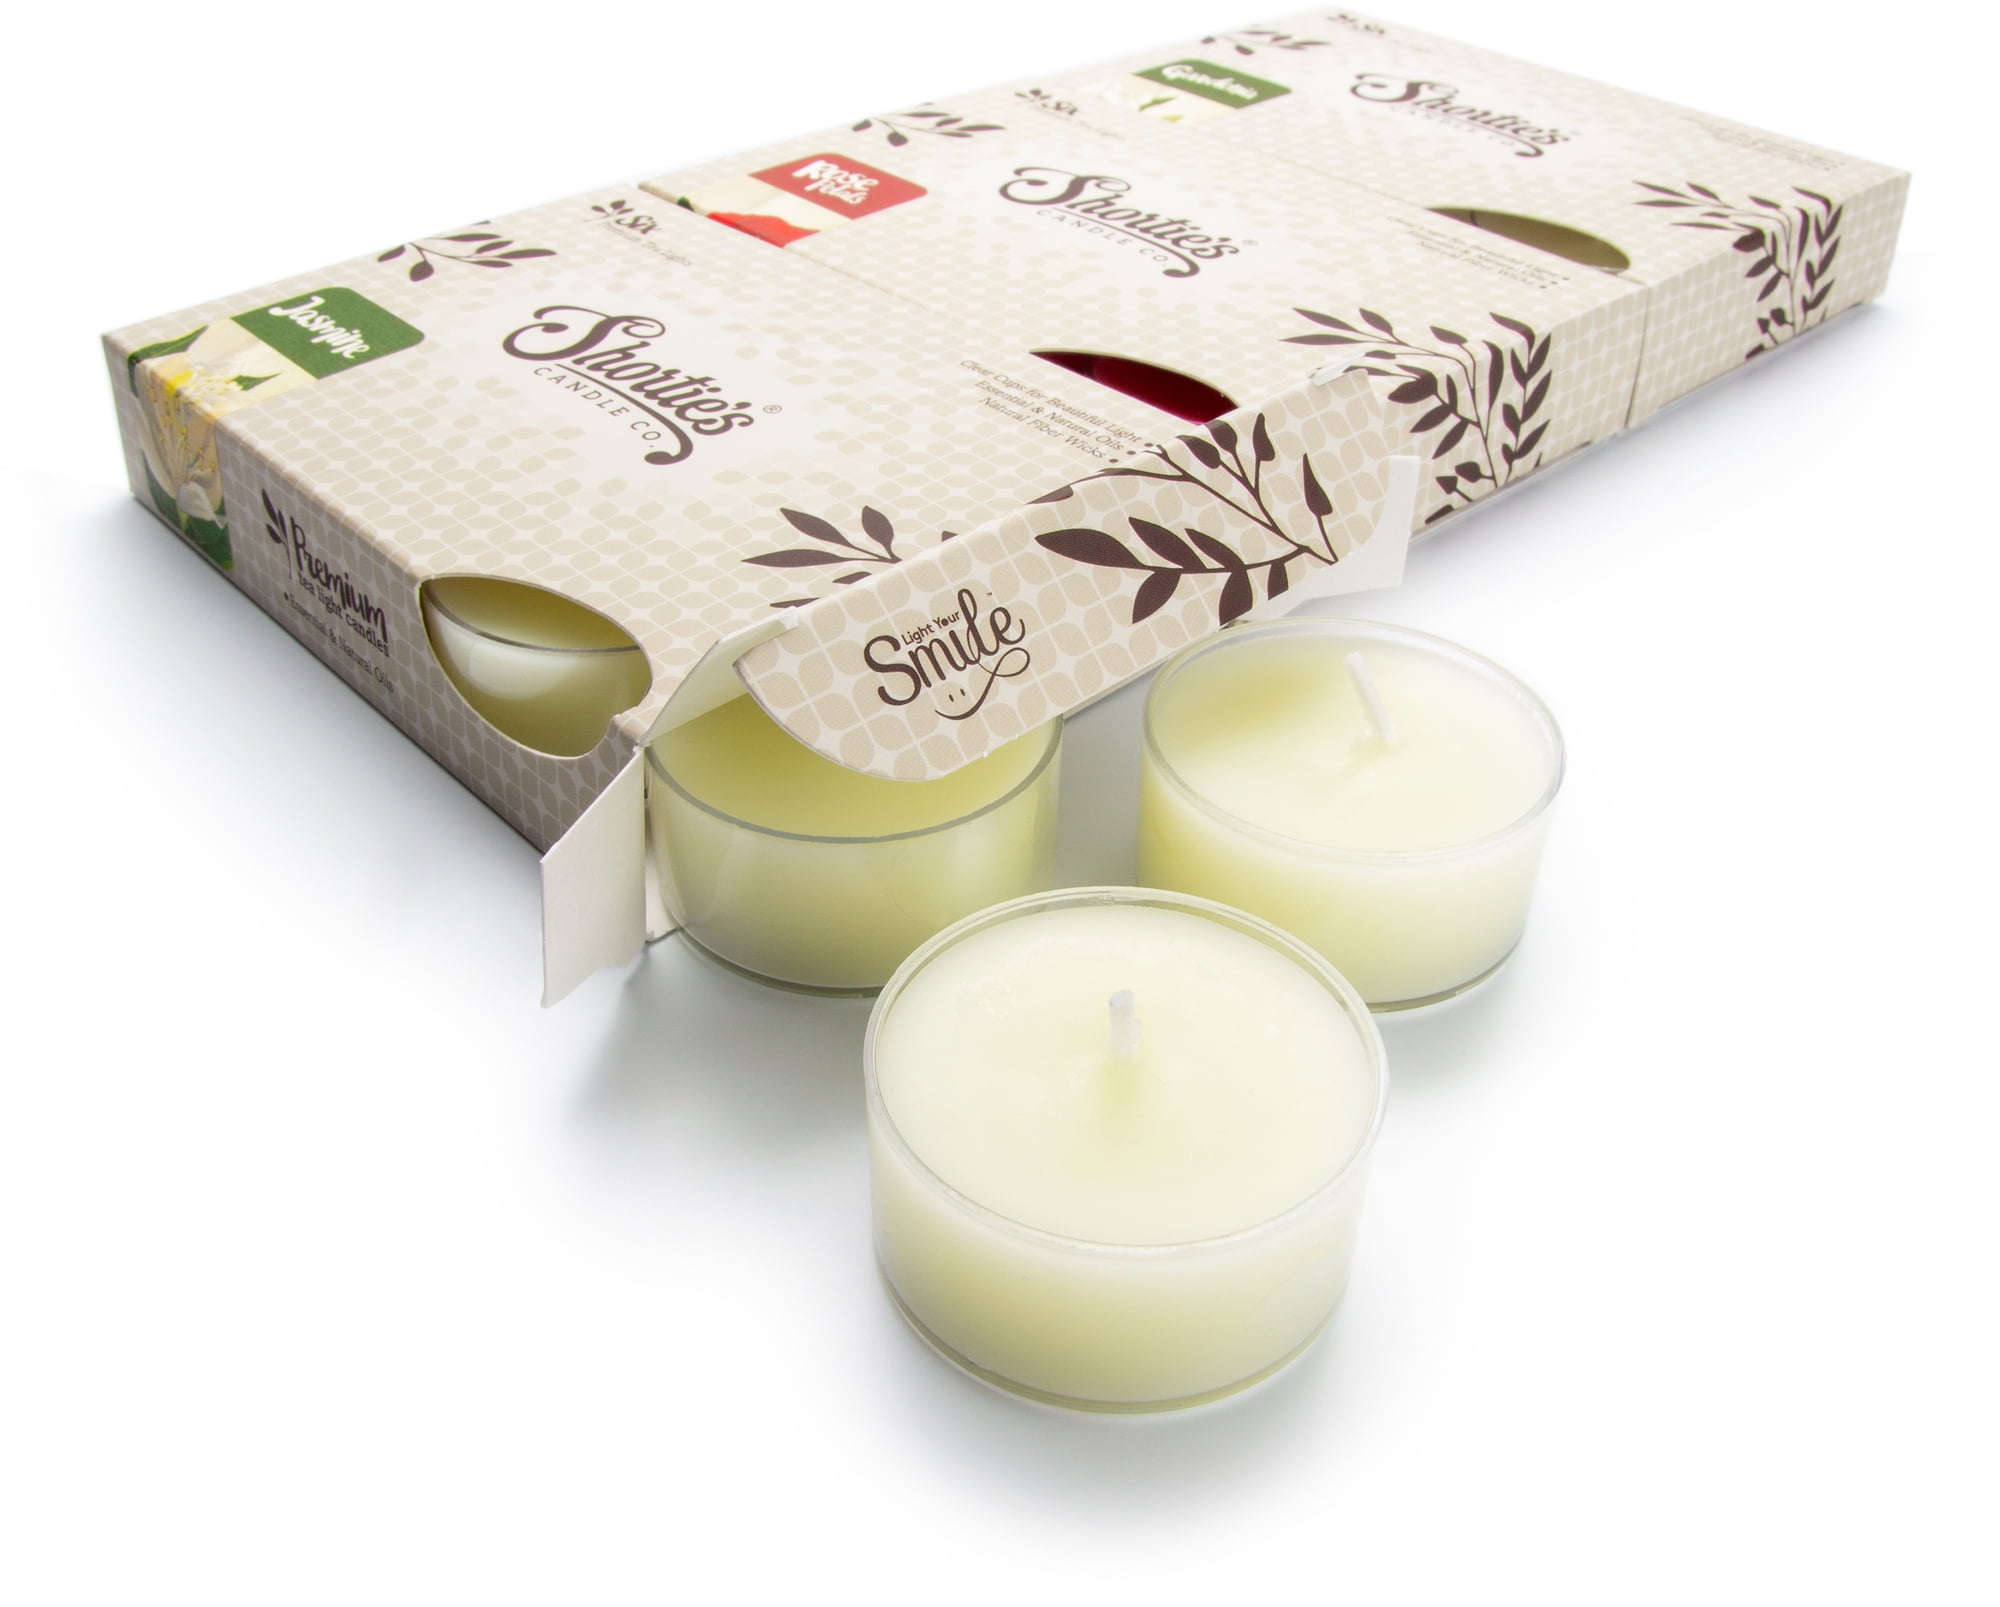 10pk MINT & GREEN APPLES Triple Scented Natural TEA LIGHT CANDLES 60 hrs/pack 